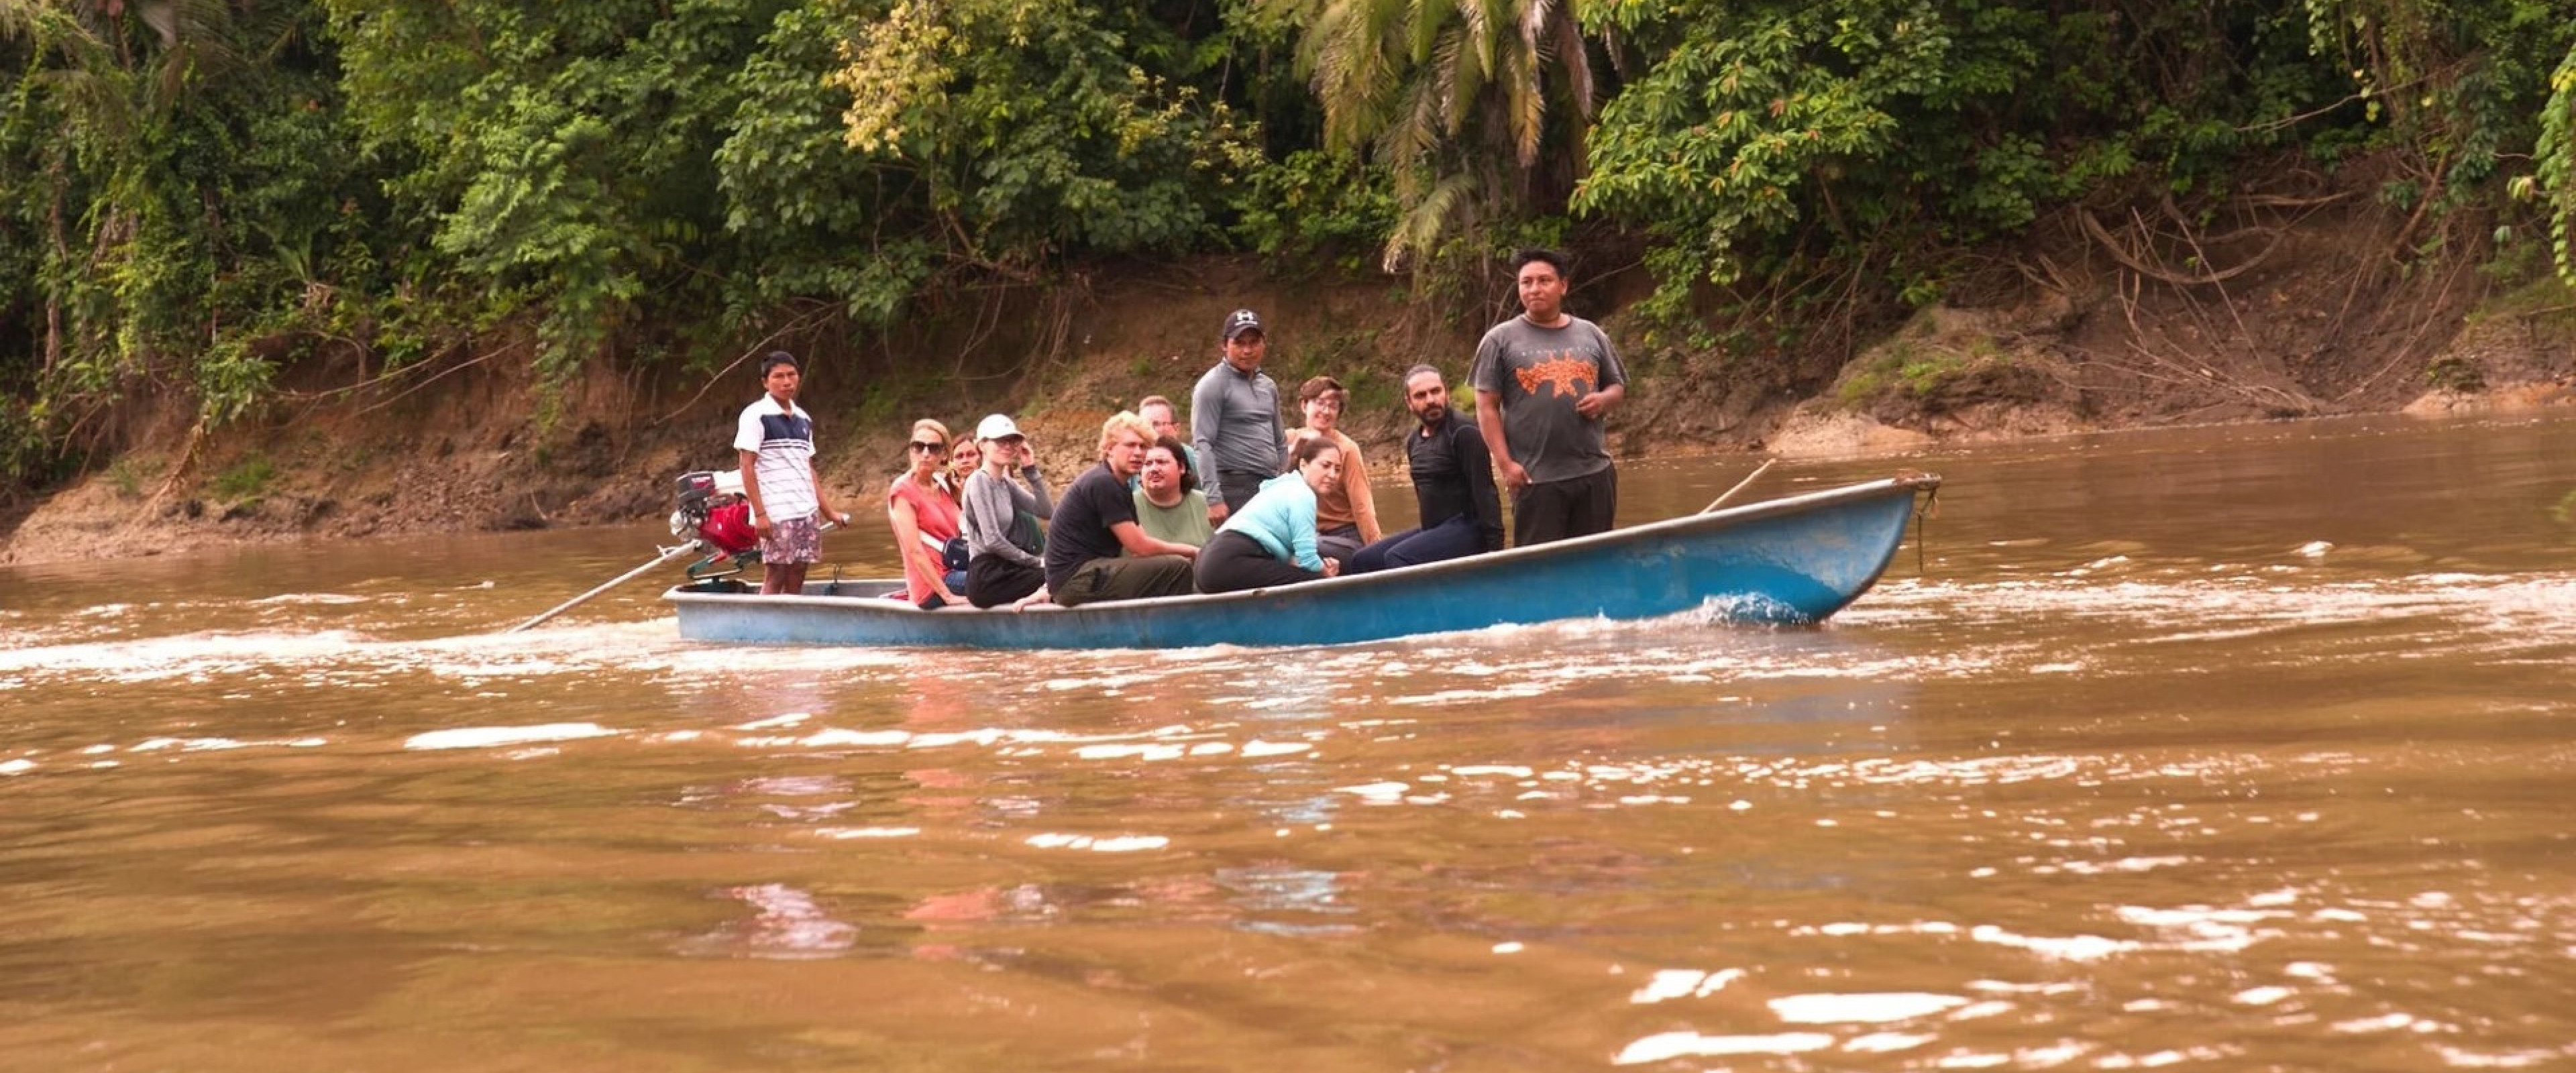 Students studying abroad in Ecuador on a boat.